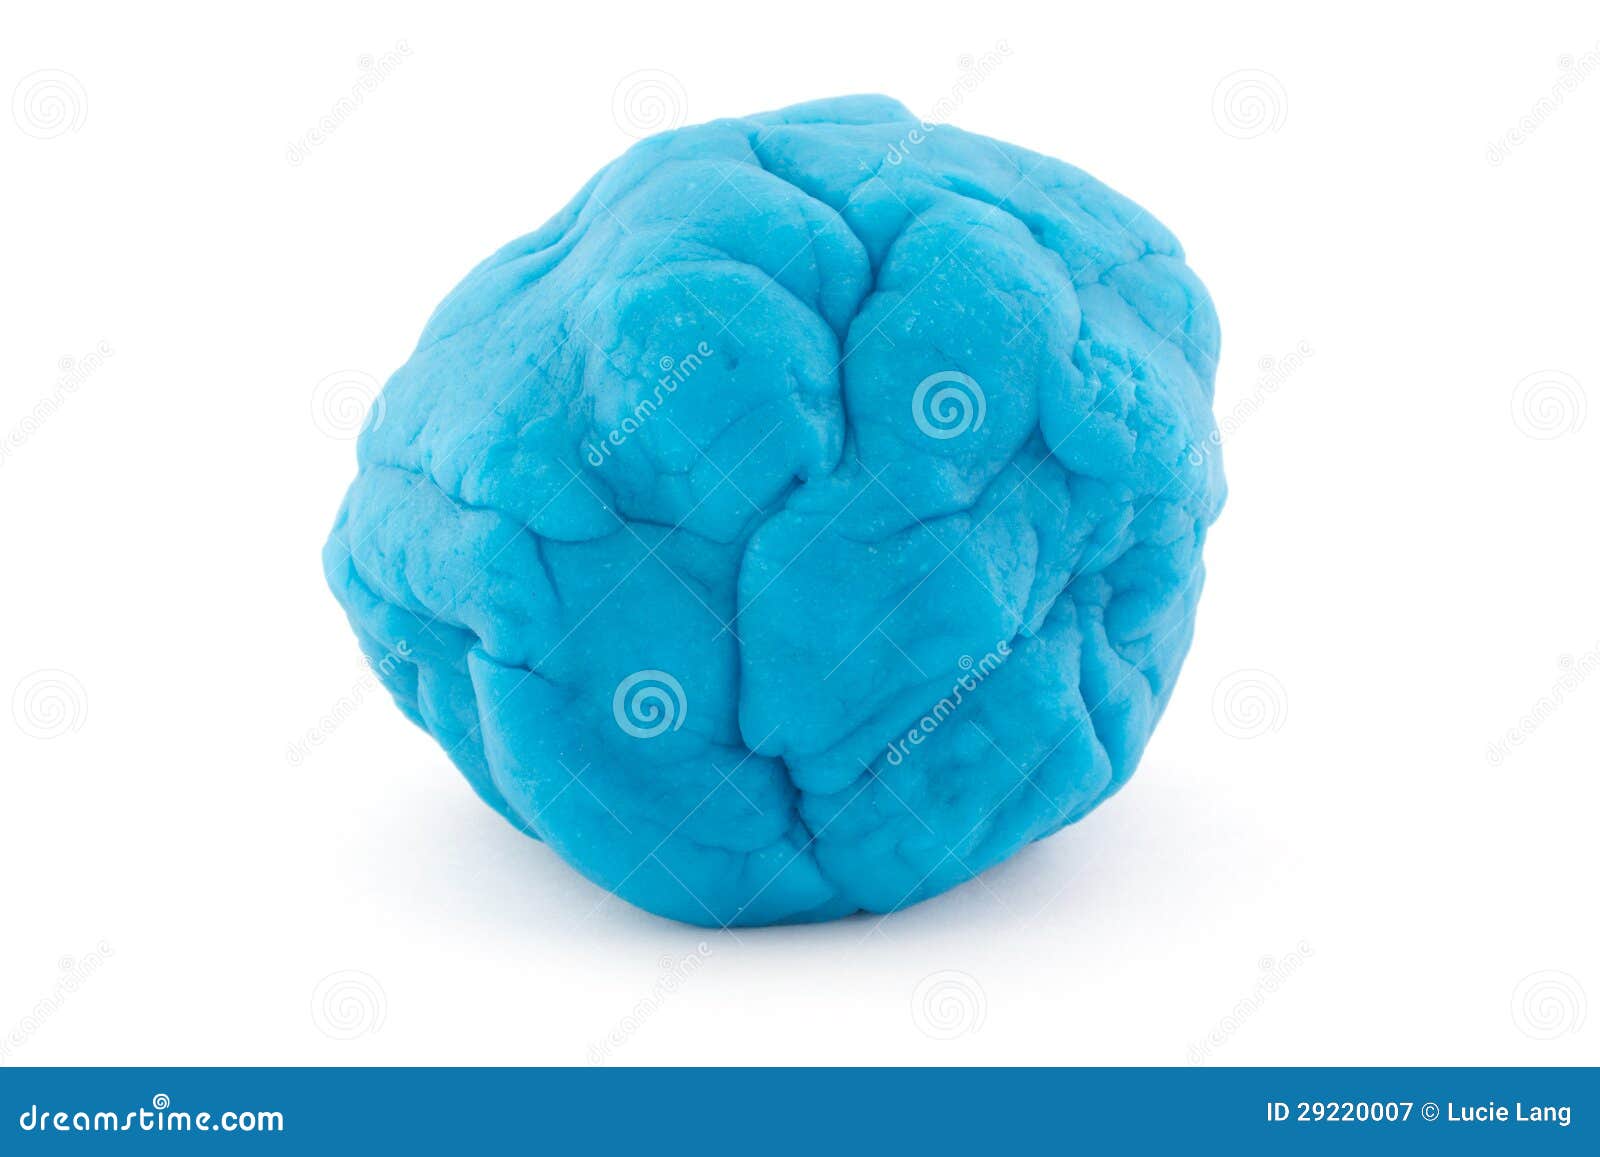 ball of blue play dough on white